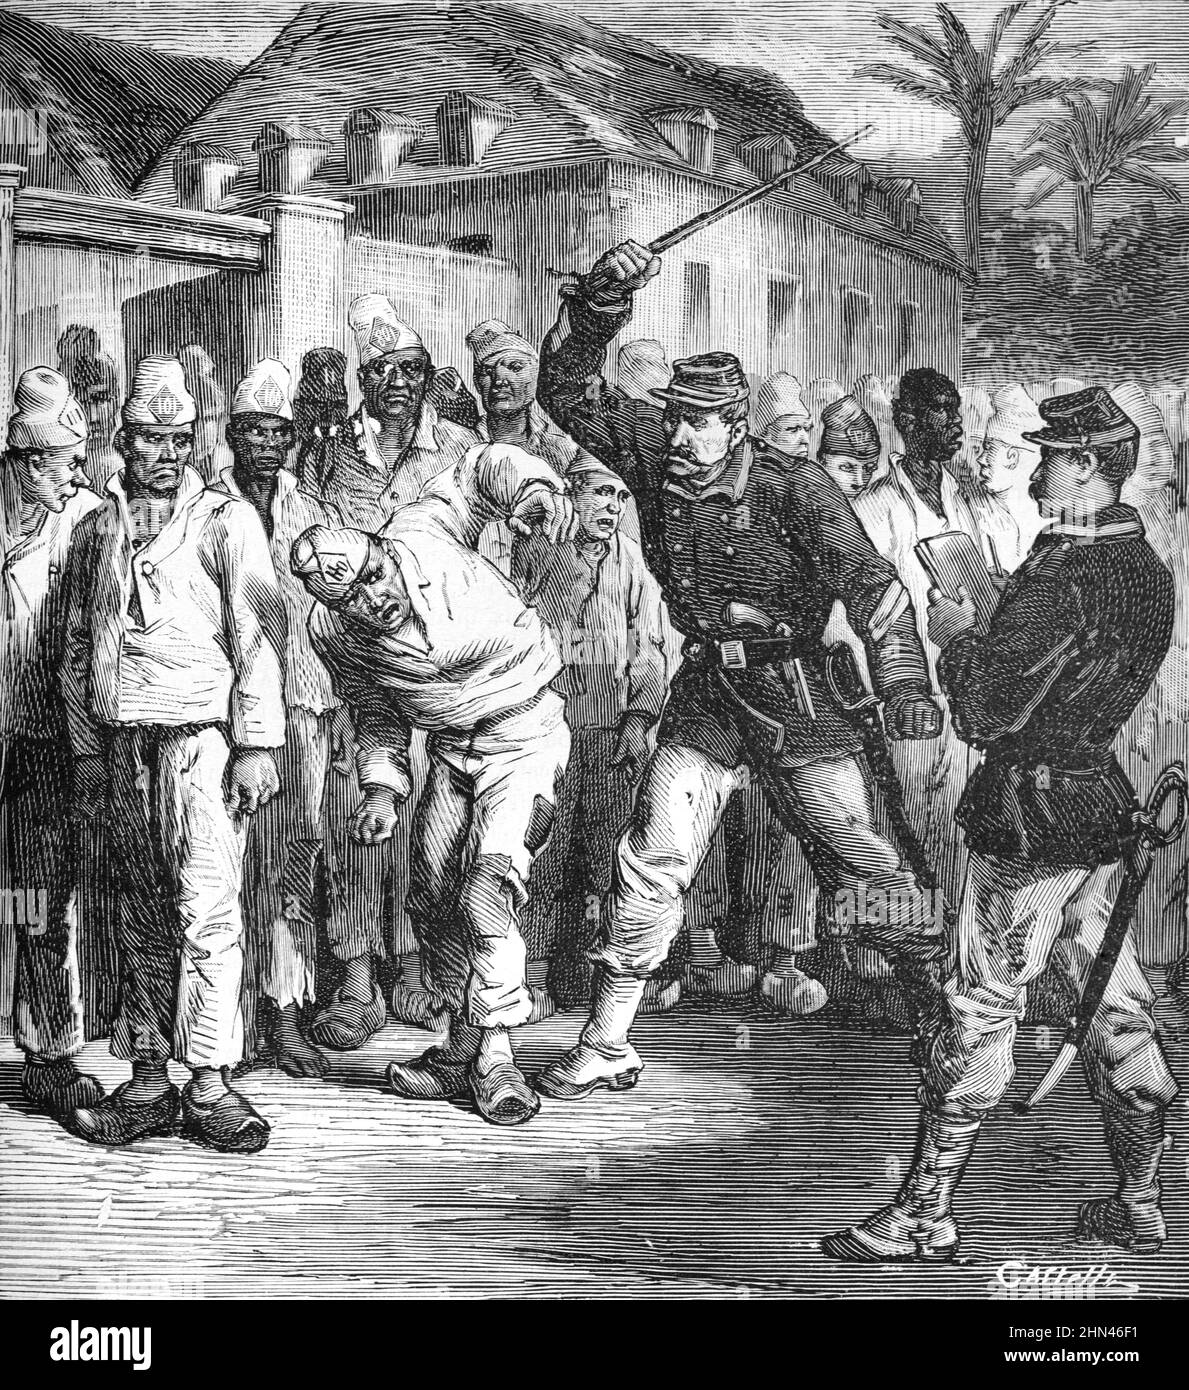 A Prison Warden Beats a Prison while other Detainees Look On. Prisoners & Prison Wardens in the Penal Colony of Cayenne, or Devil's Island, which operated from 1852 to 1953, French Guiana. Vintage Illustration or Engraving 1881 (Castelli) Stock Photo